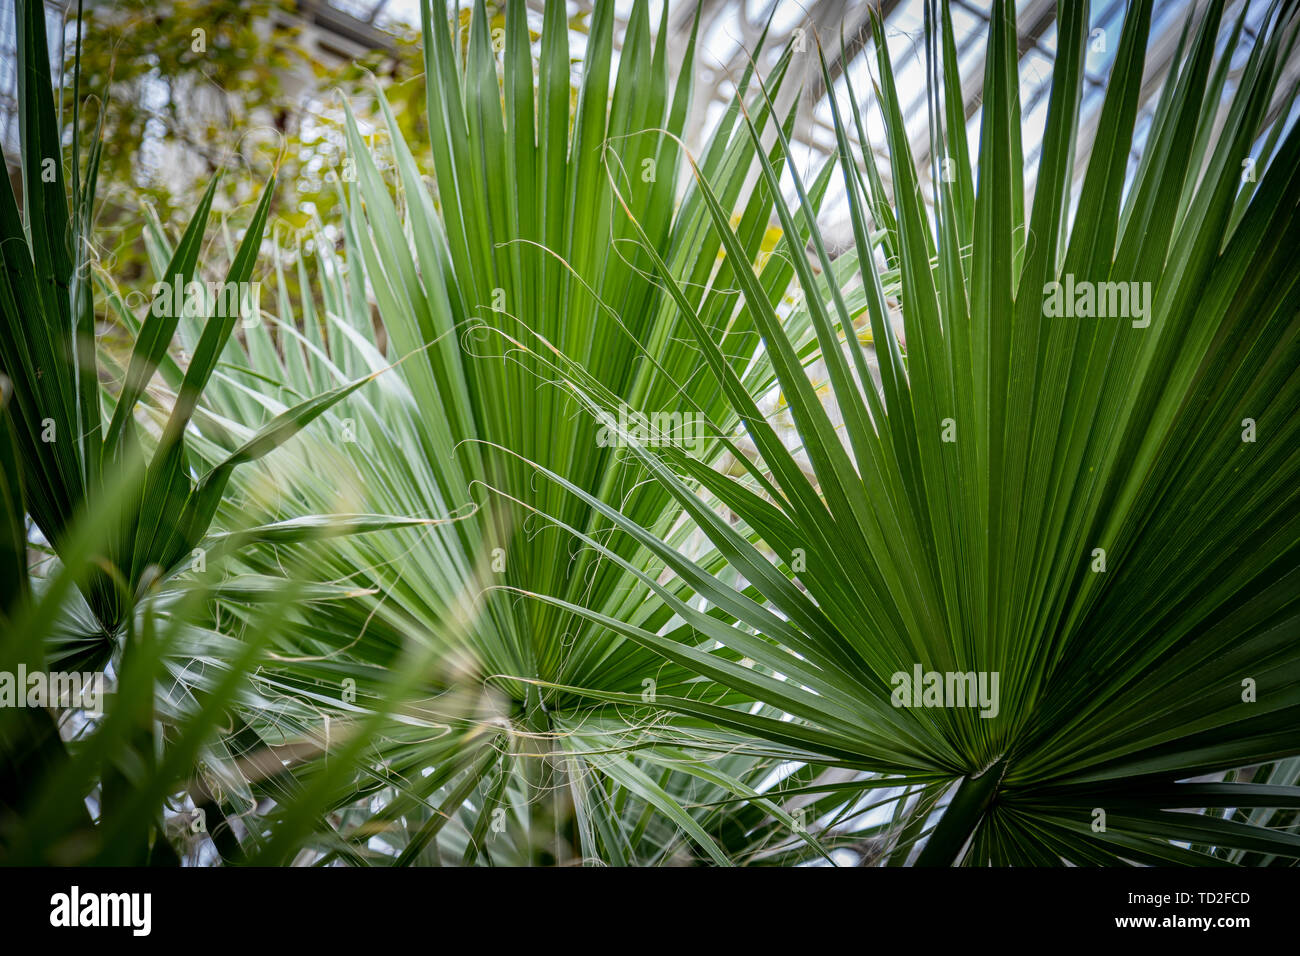 Close up of green Mexican fan palm leaves growing in Kew Gardens, London. Stock Photo